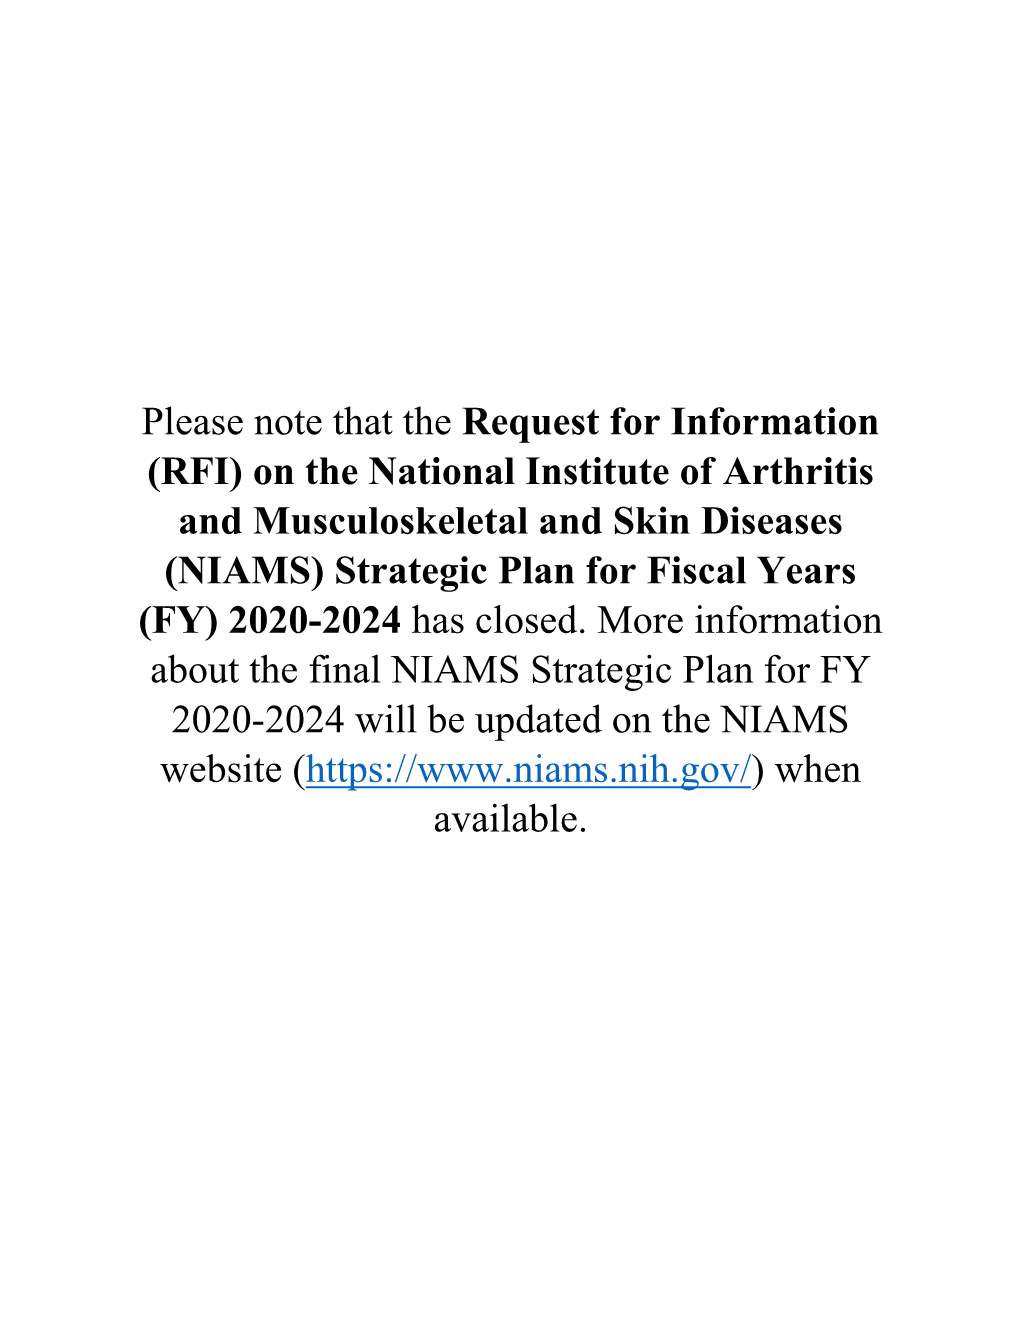 (RFI) on the National Institute of Arthritis and Musculoskeletal and Skin Diseases (NIAMS) Strategic Plan for Fiscal Years (FY) 2020-2024 Has Closed